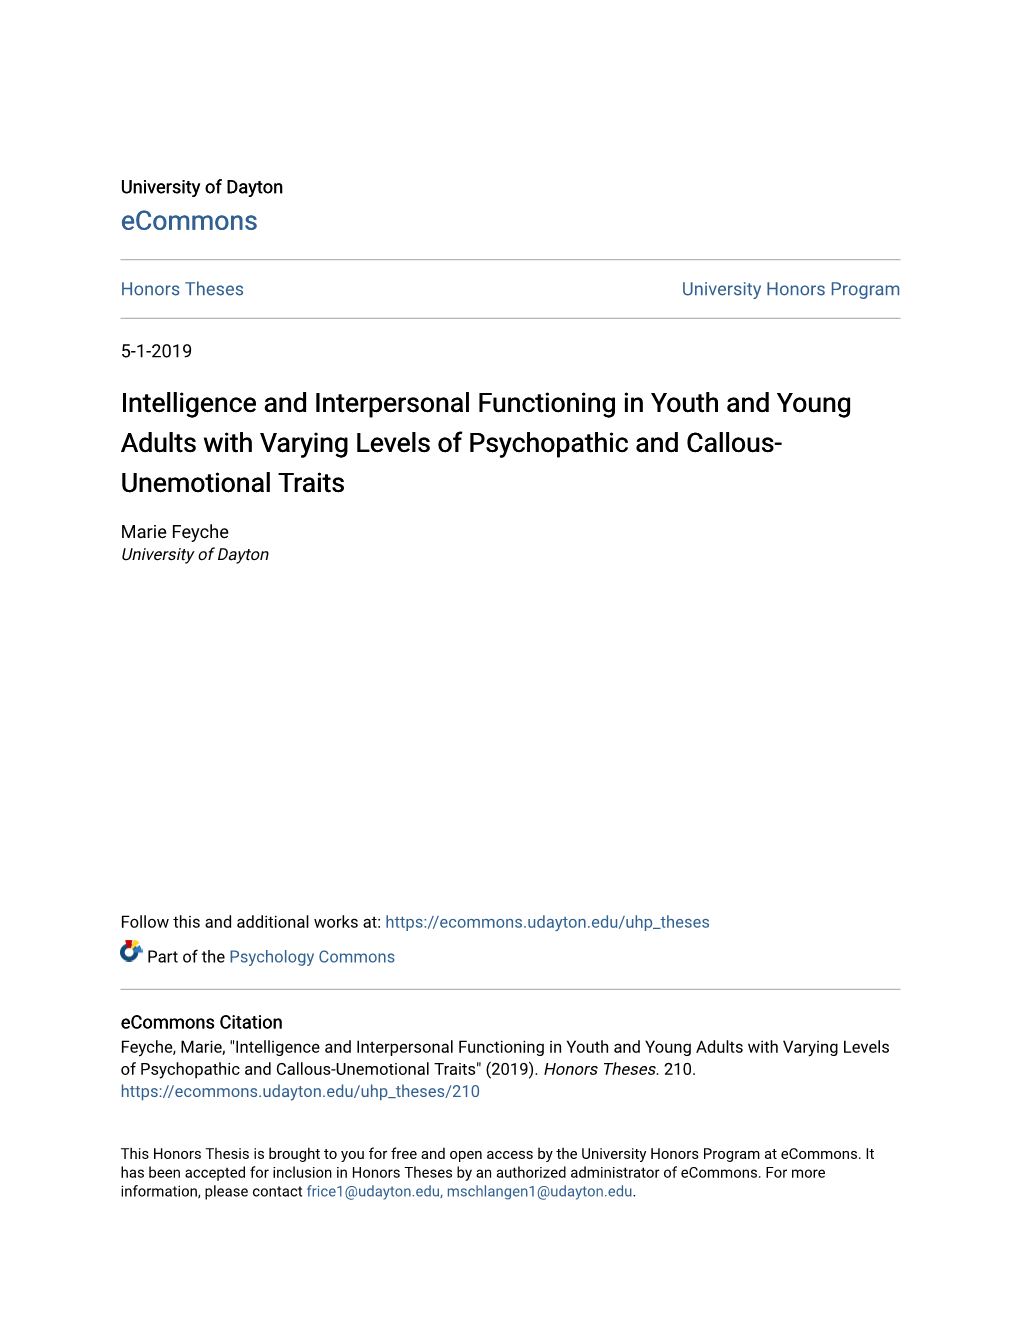 Intelligence and Interpersonal Functioning in Youth and Young Adults with Varying Levels of Psychopathic and Callous-Unemotional Traits" (2019)